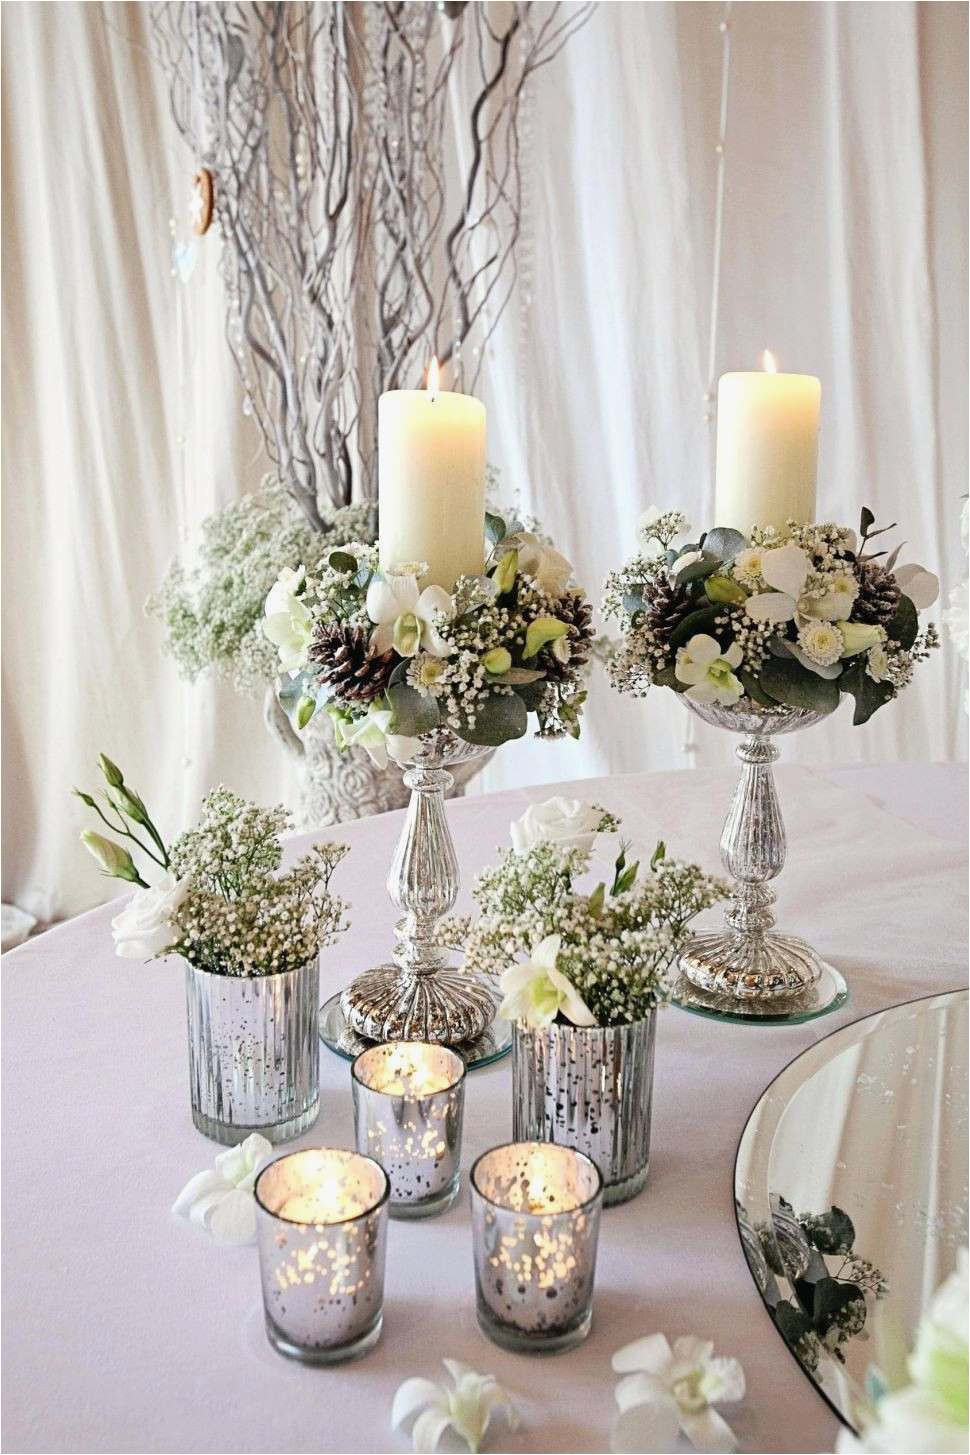 20 Great Flower Vase Decoration Ideas 2024 free download flower vase decoration ideas of 28 cool wedding reception decoration ideas trending best wedding regarding cool living room vases wholesale new h vases big tall i 0d for cheap design wedding